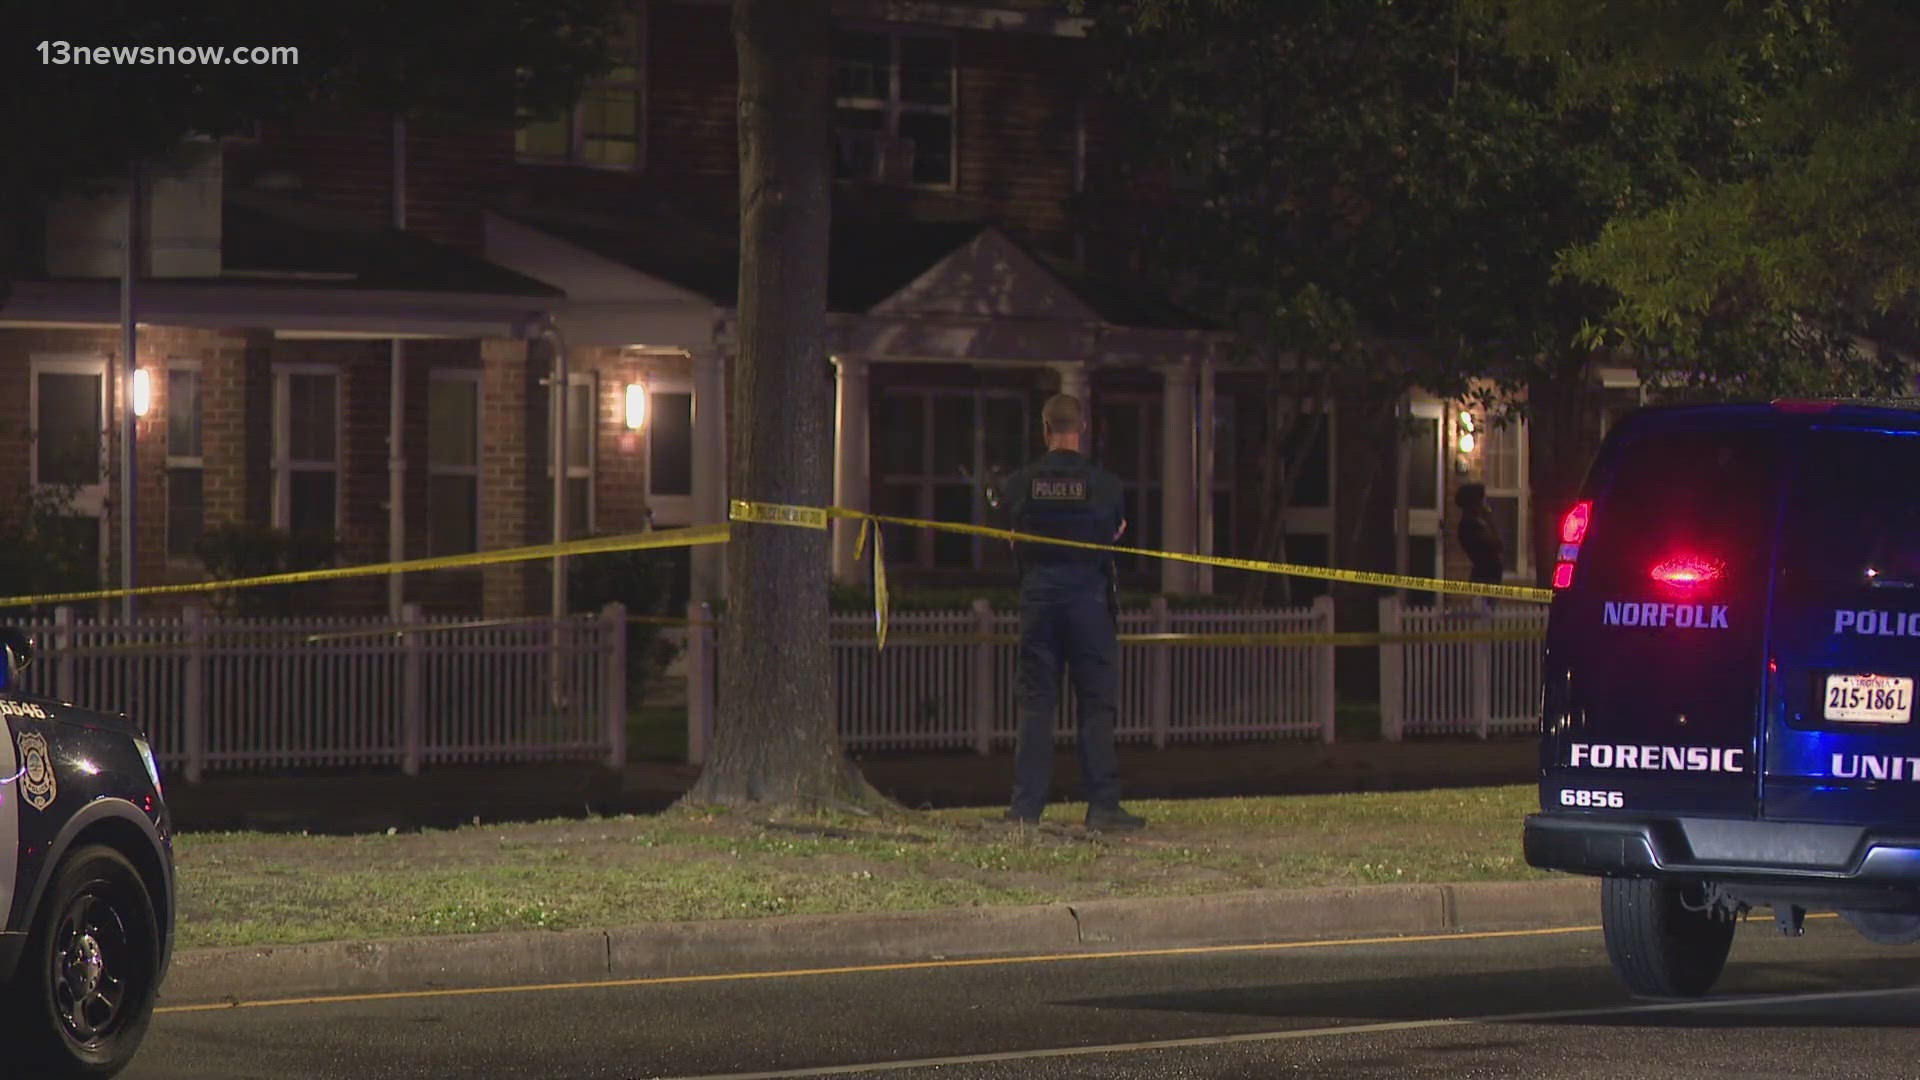 A man is fighting for his life after a police shooting in Norfolk on Friday night. It happened just after 8 p.m. along Bagnall Road.